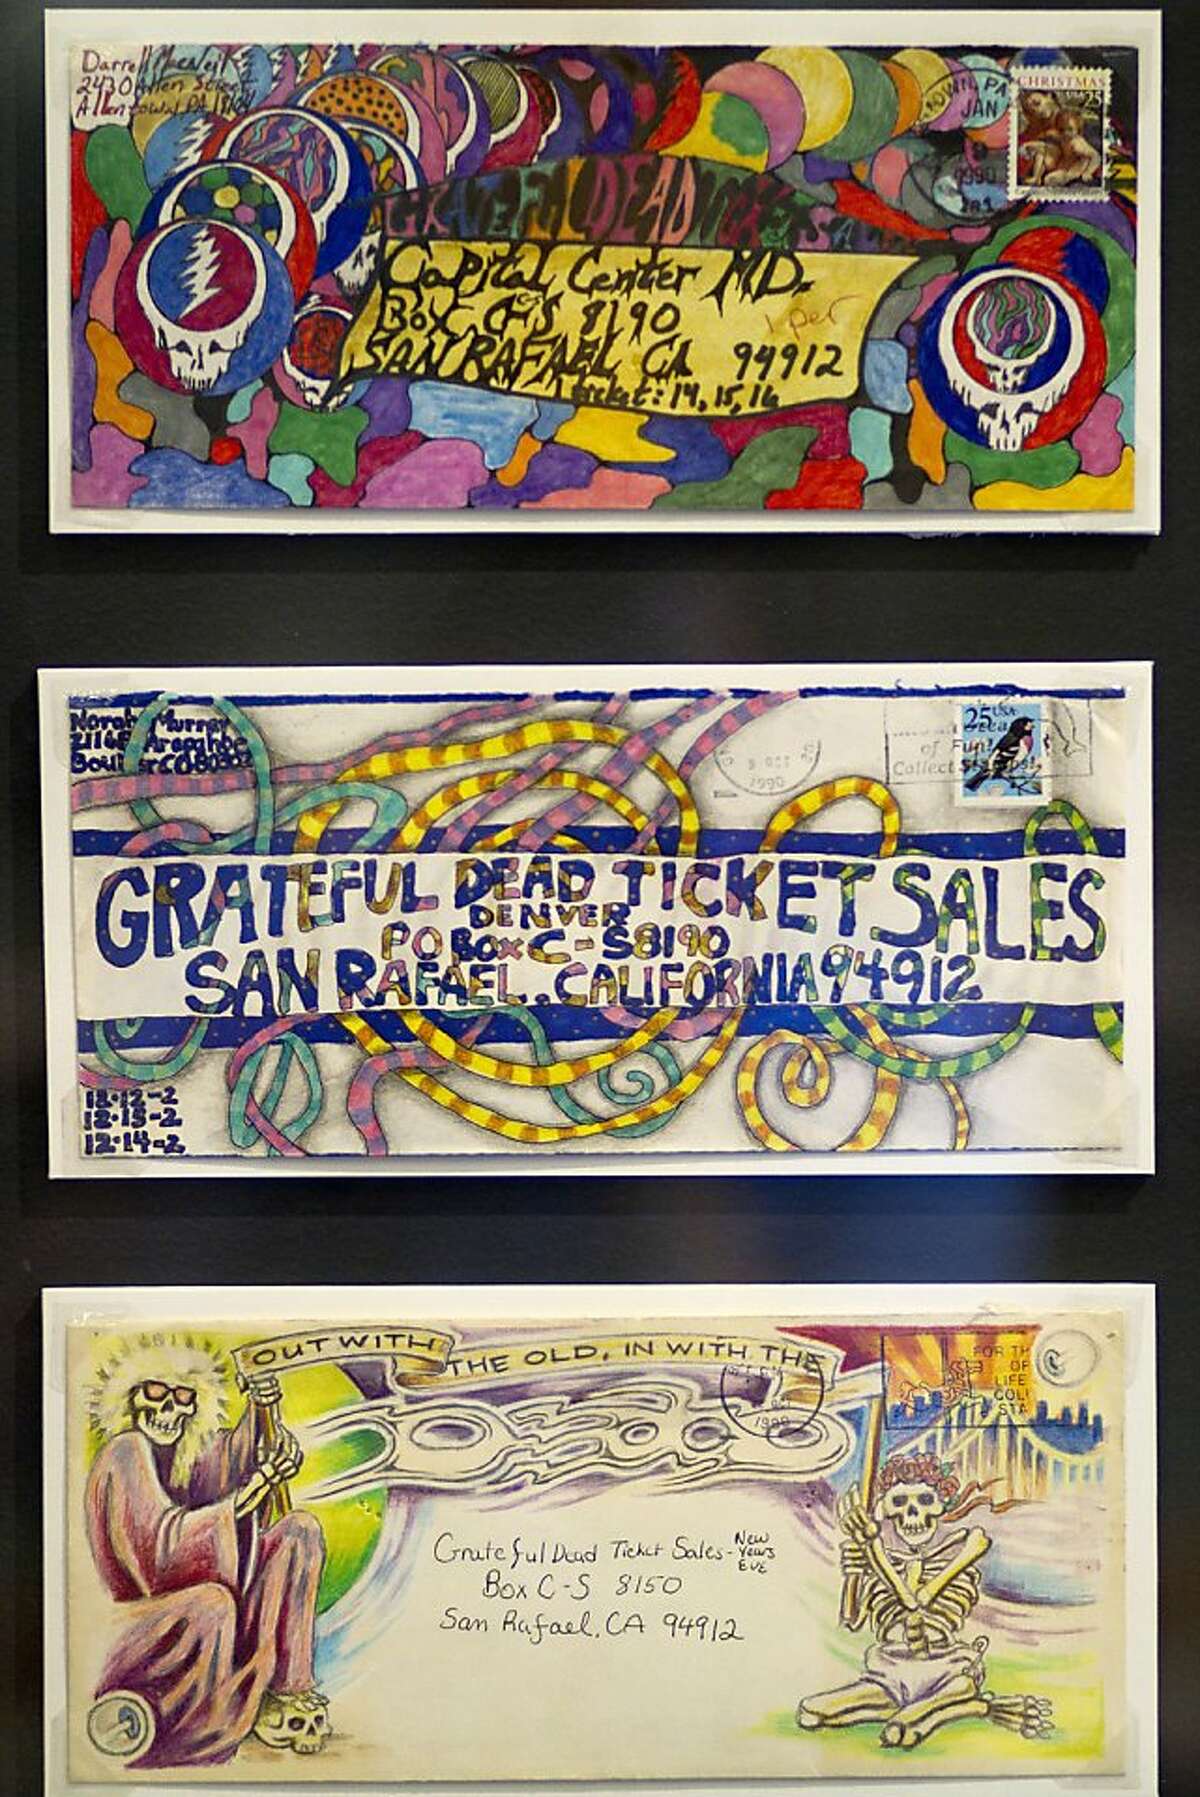 Fan art on envelopes was encouraged by the Grateful Dead with promises of free tickets for the best artwork. The Grateful Dead Archive has opened to the public on the University of California Santa Cruz's McHenry Library this week.